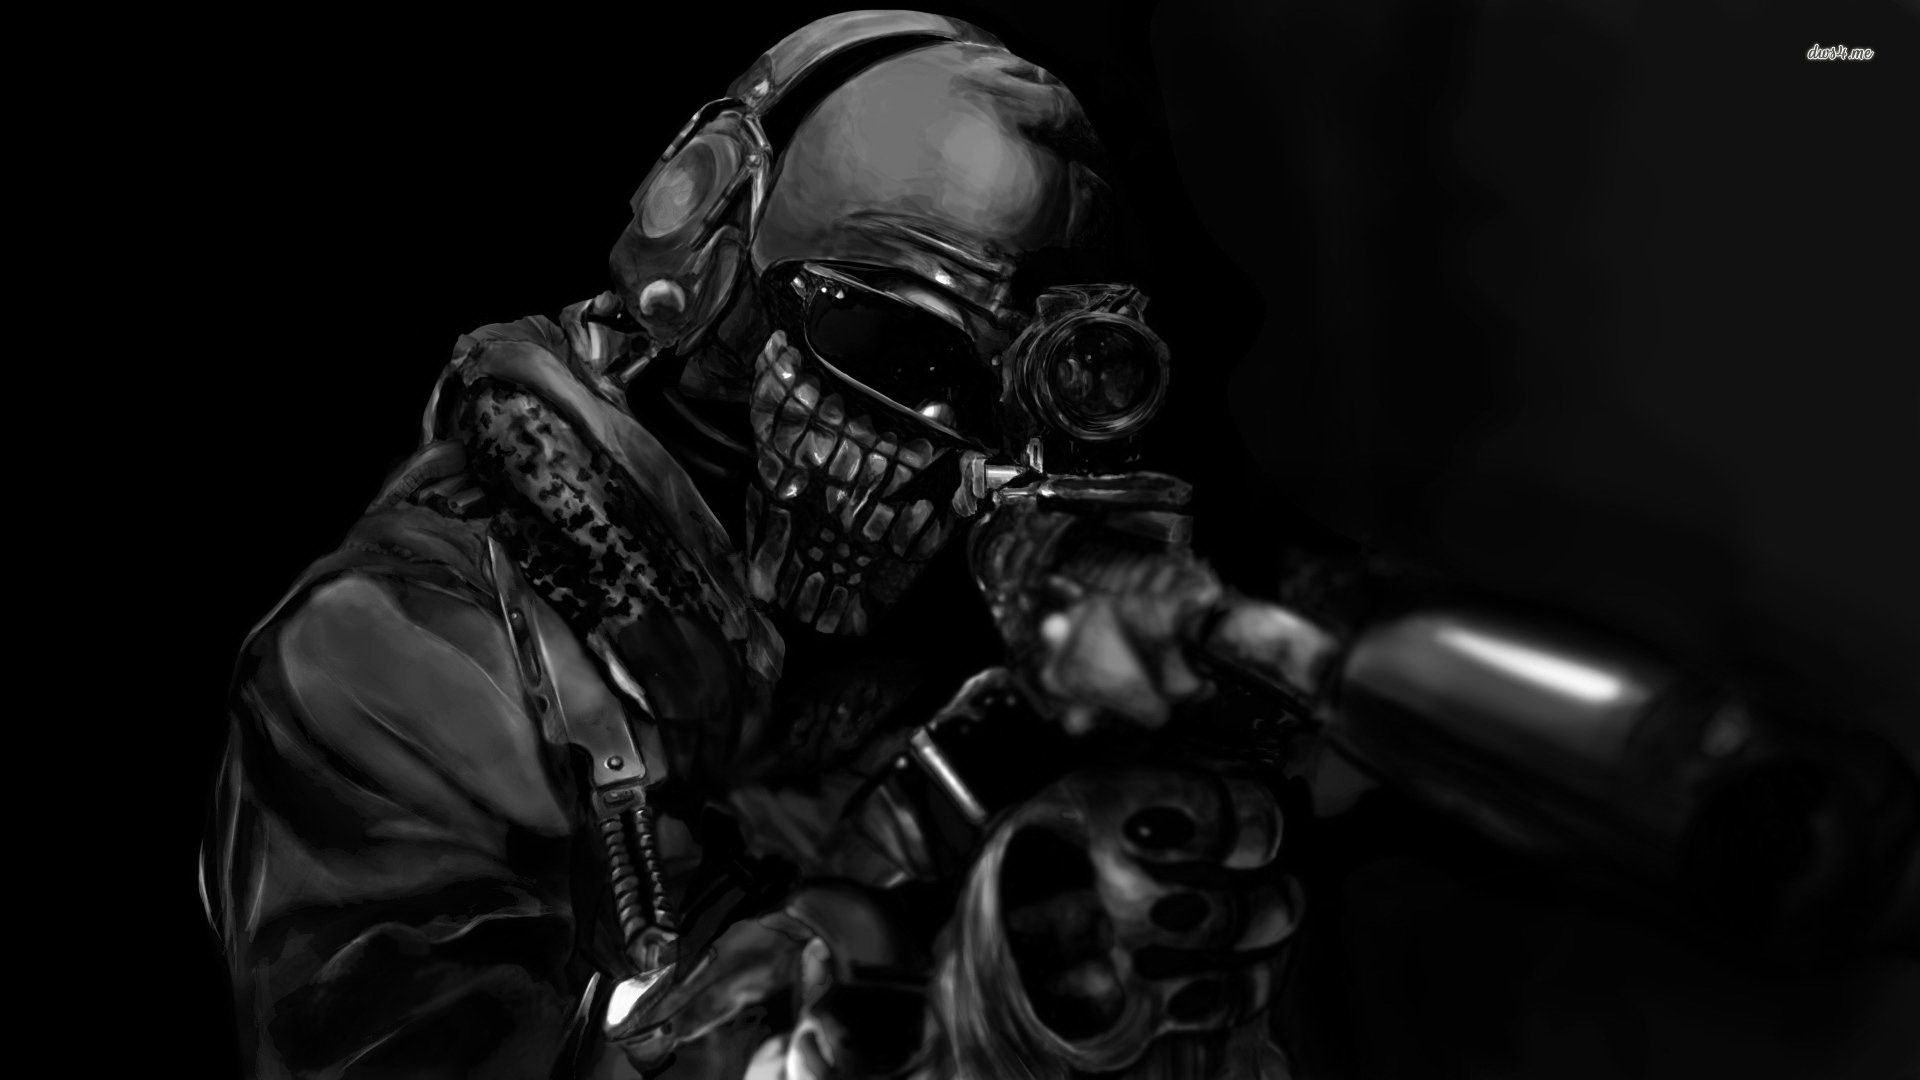 Call of Duty HD wallpaper. Call of duty ghosts, Call of duty black, Call of duty